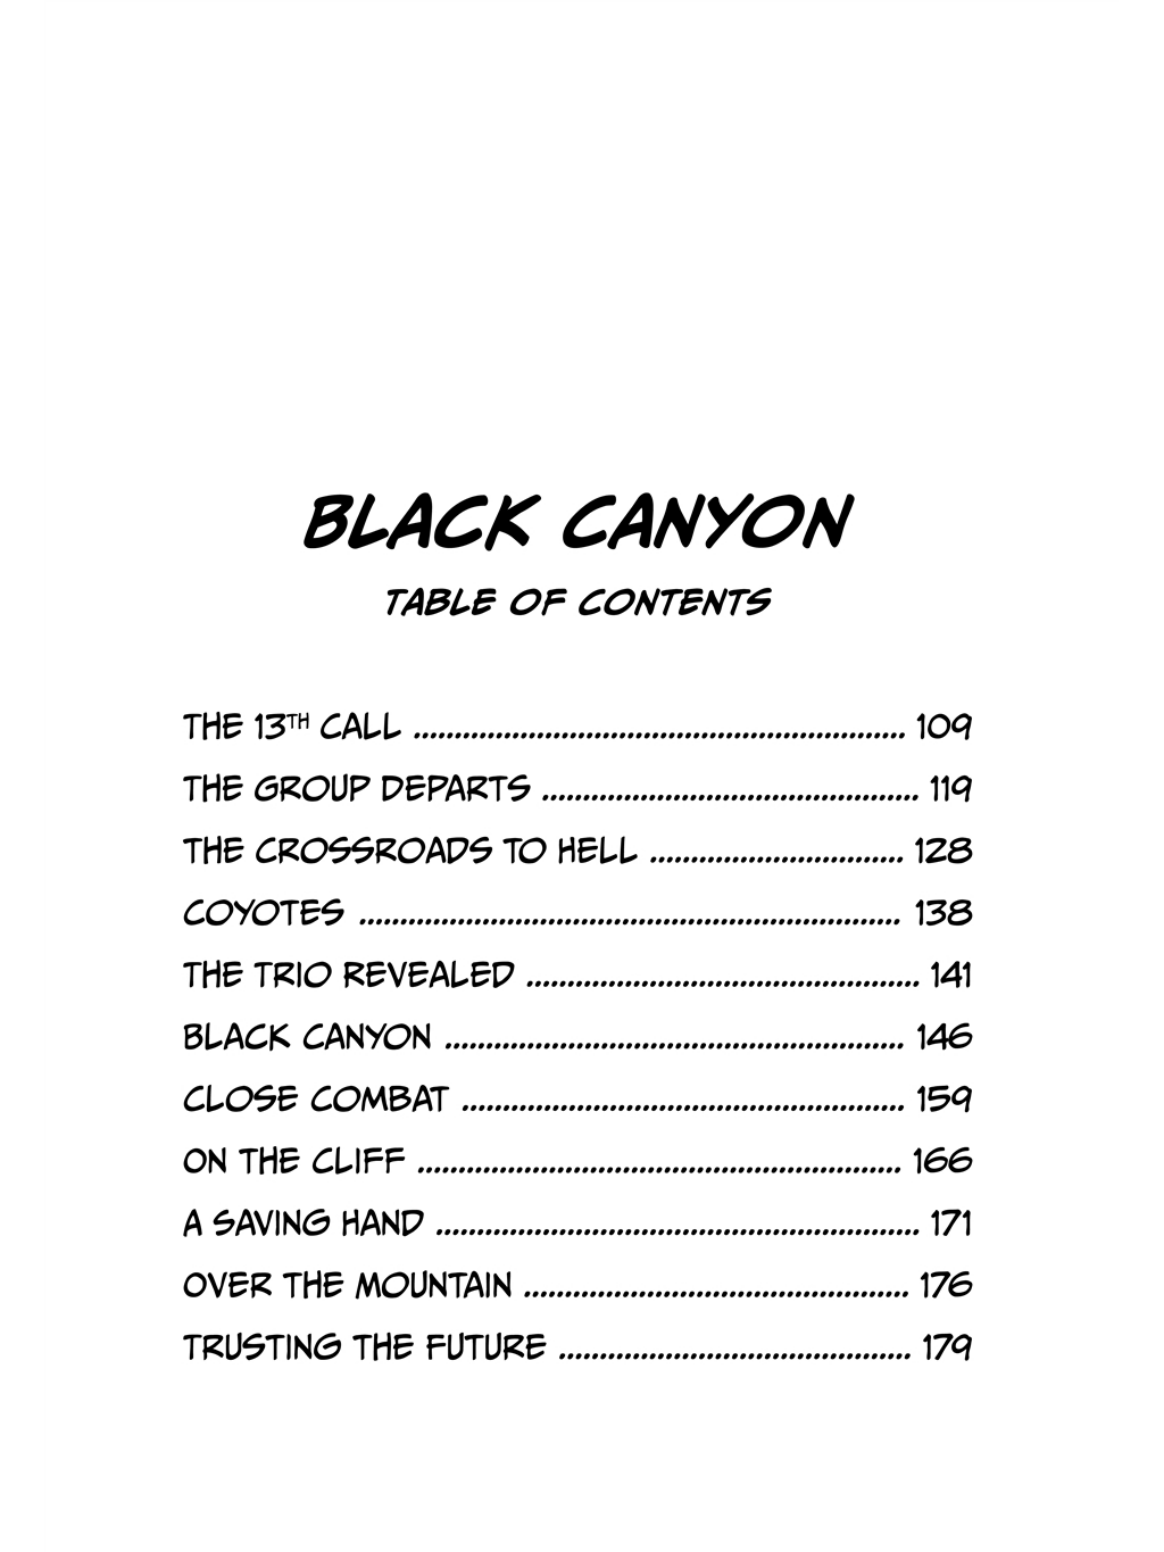 Lemon Kid Vol.1 Chapter 2: Black Canyon - The 13Th Call - Picture 2